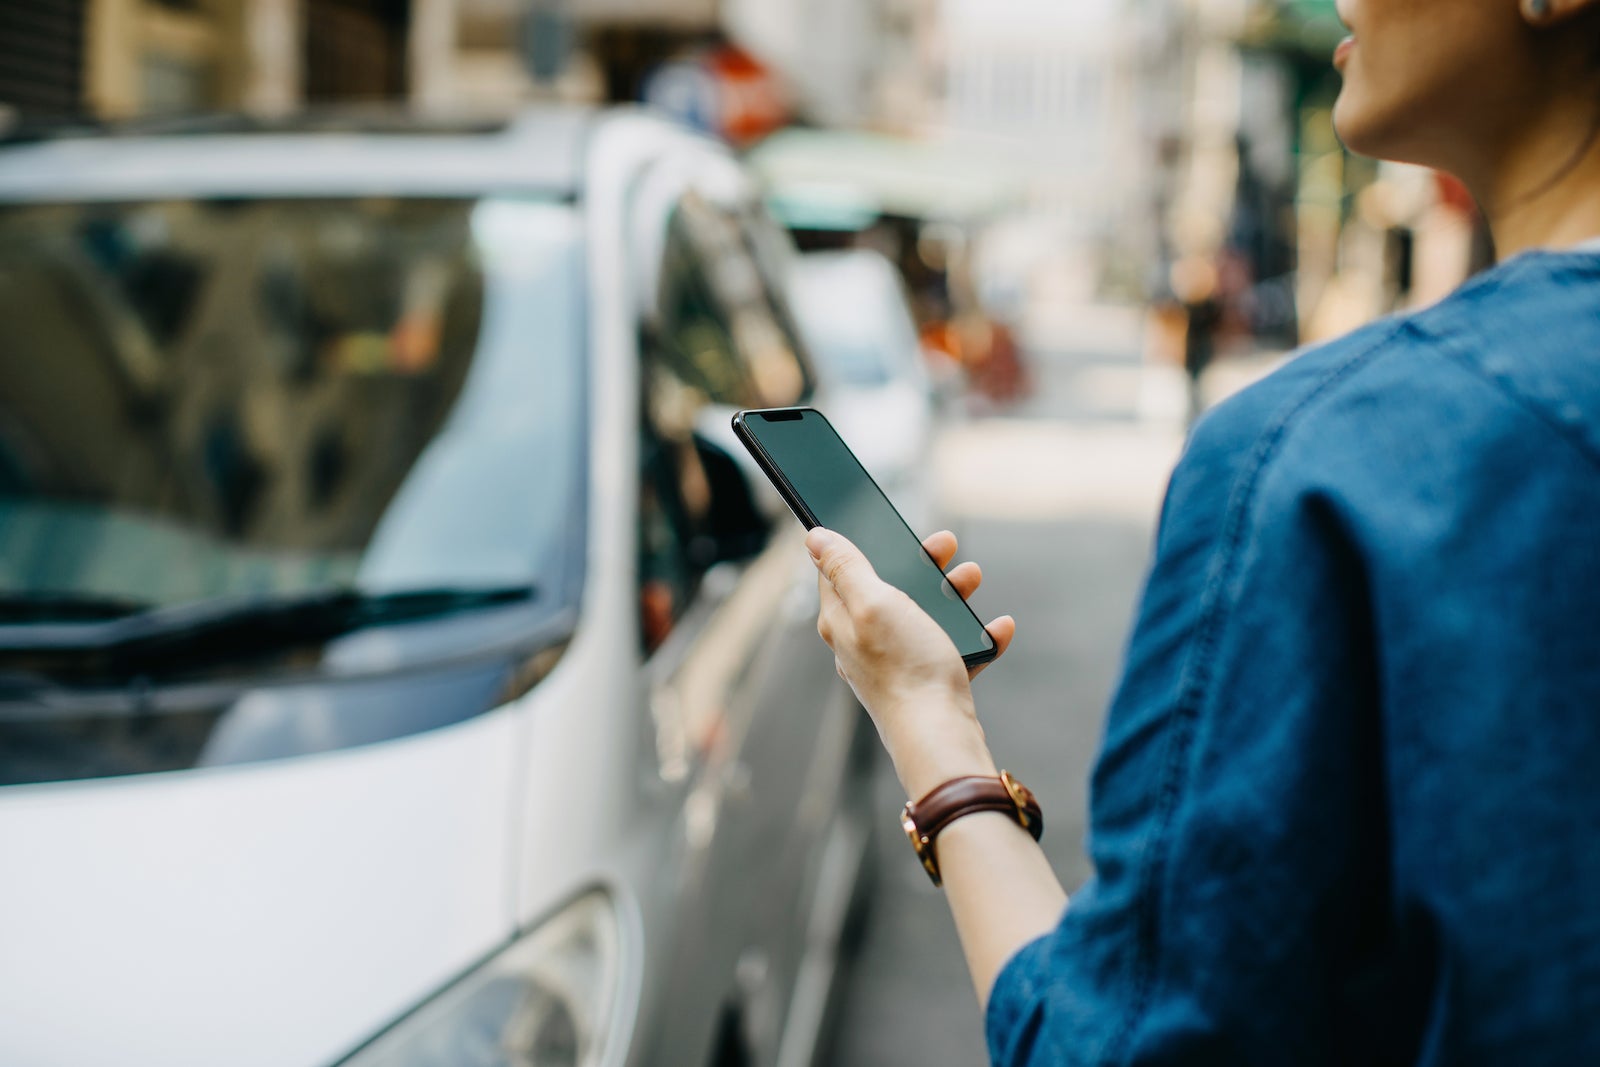 A person holds a phone while ordering from a rideshare app